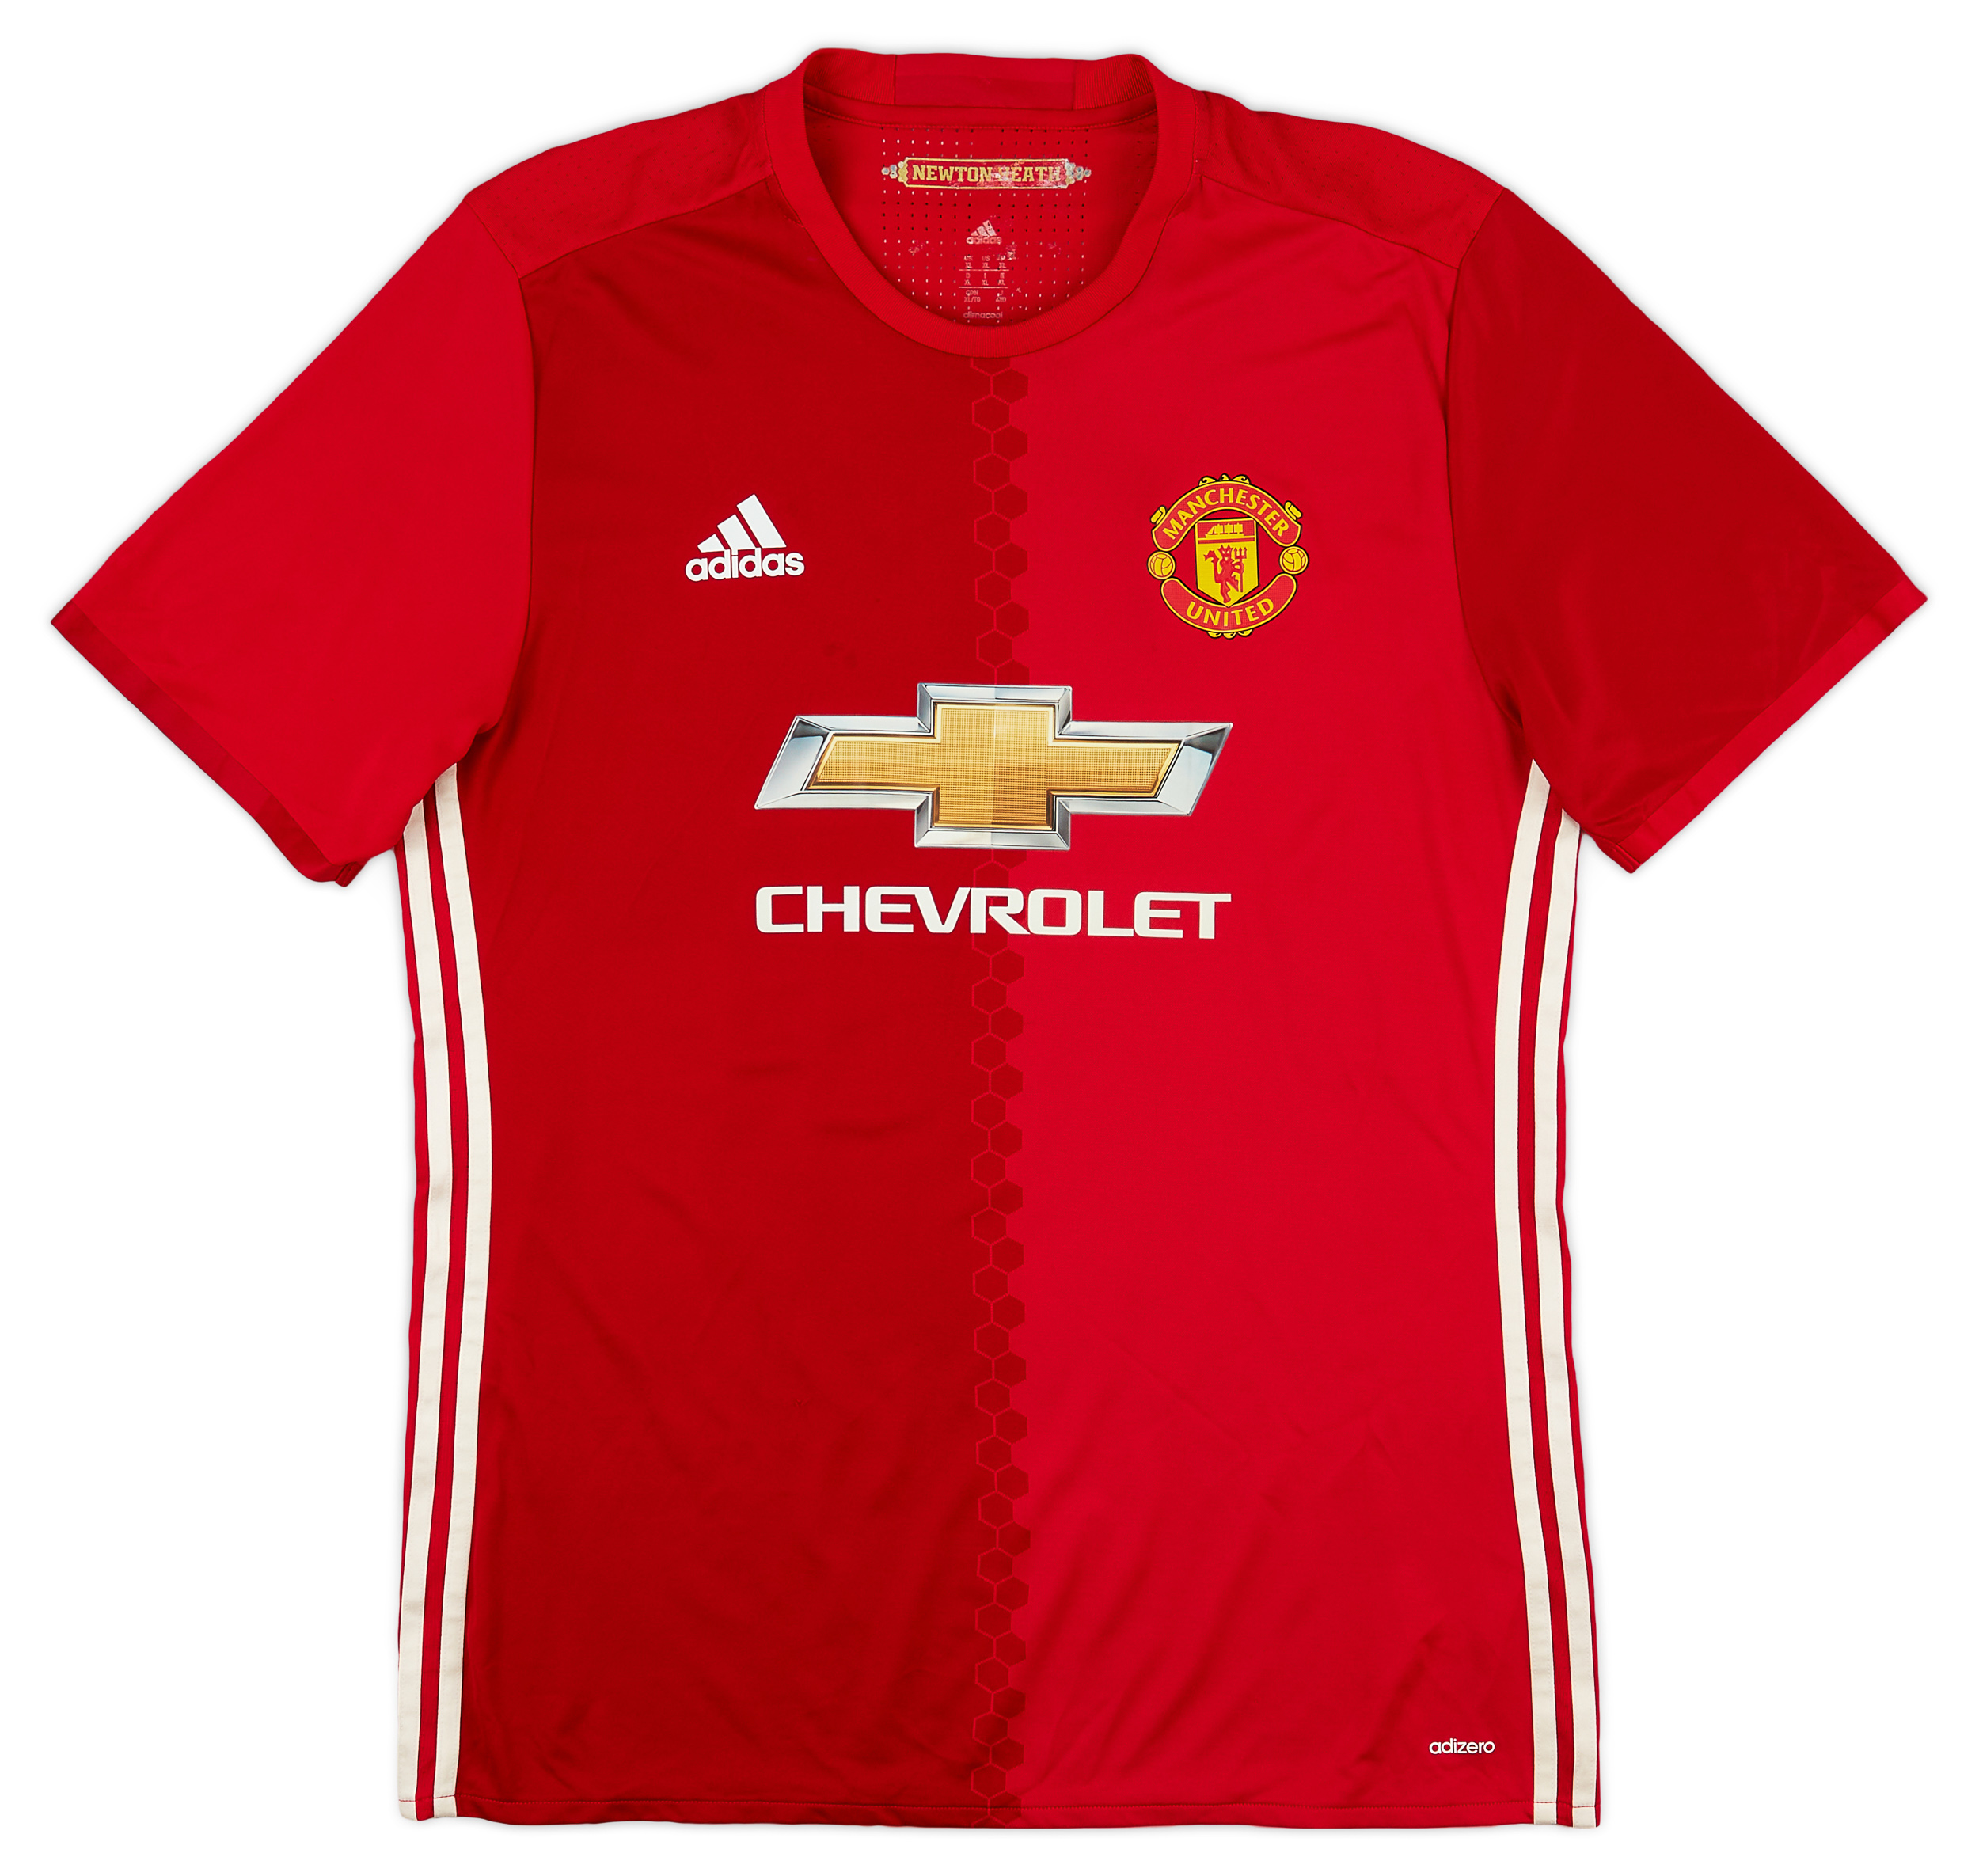 2016-17 Manchester United Authentic Home Shirt - 8/10 - ()